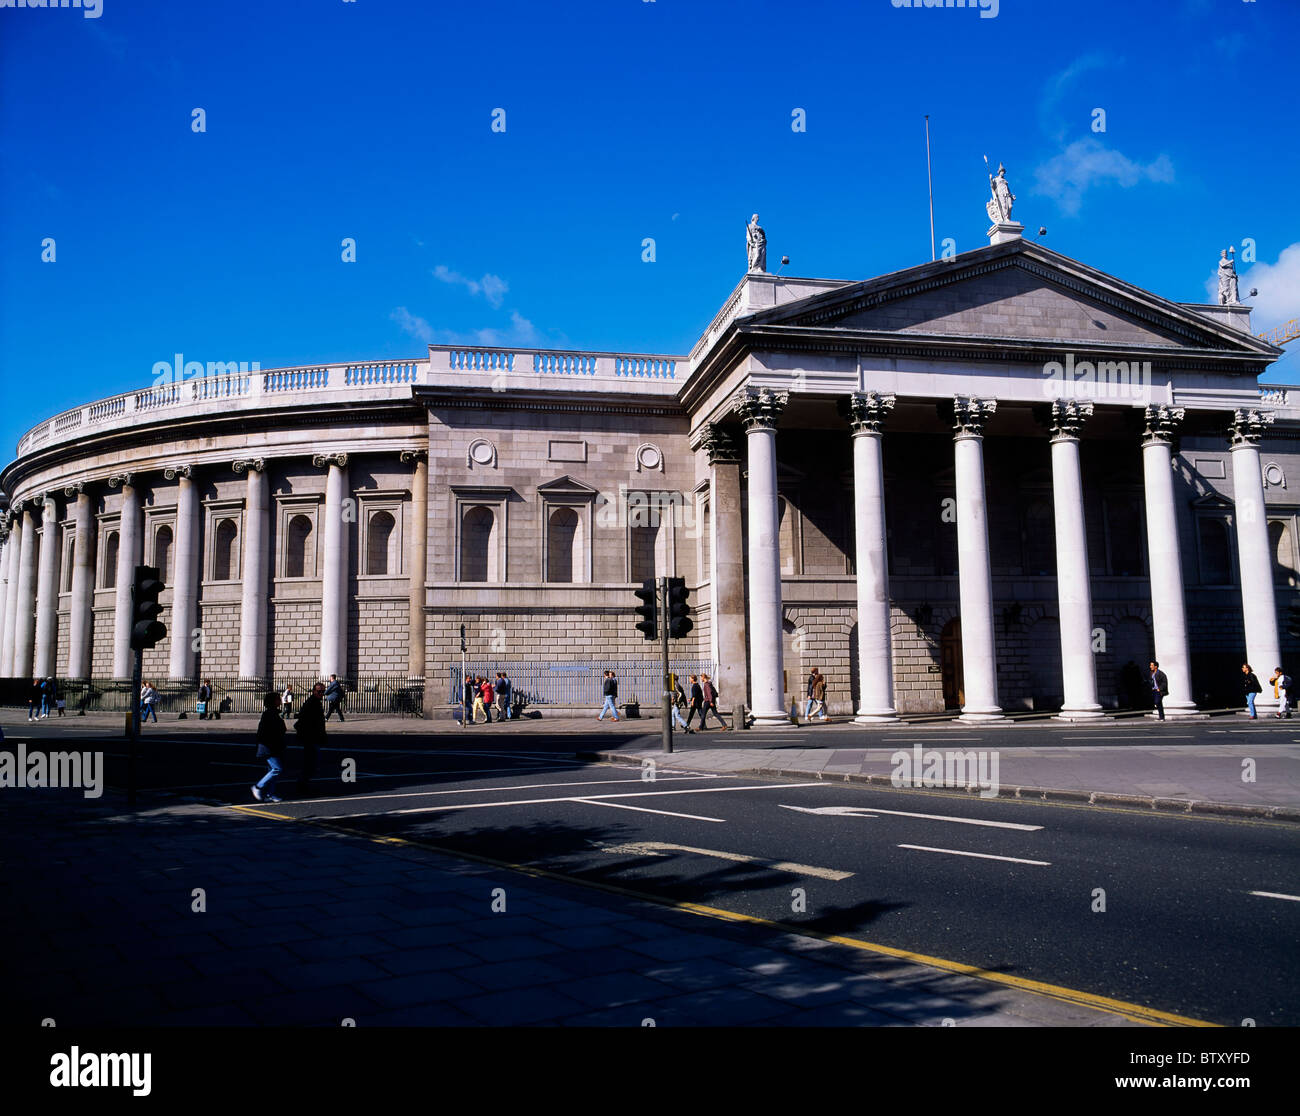 Governor And Company Of The Bank Of Ireland High Resolution Stock  Photography and Images - Alamy